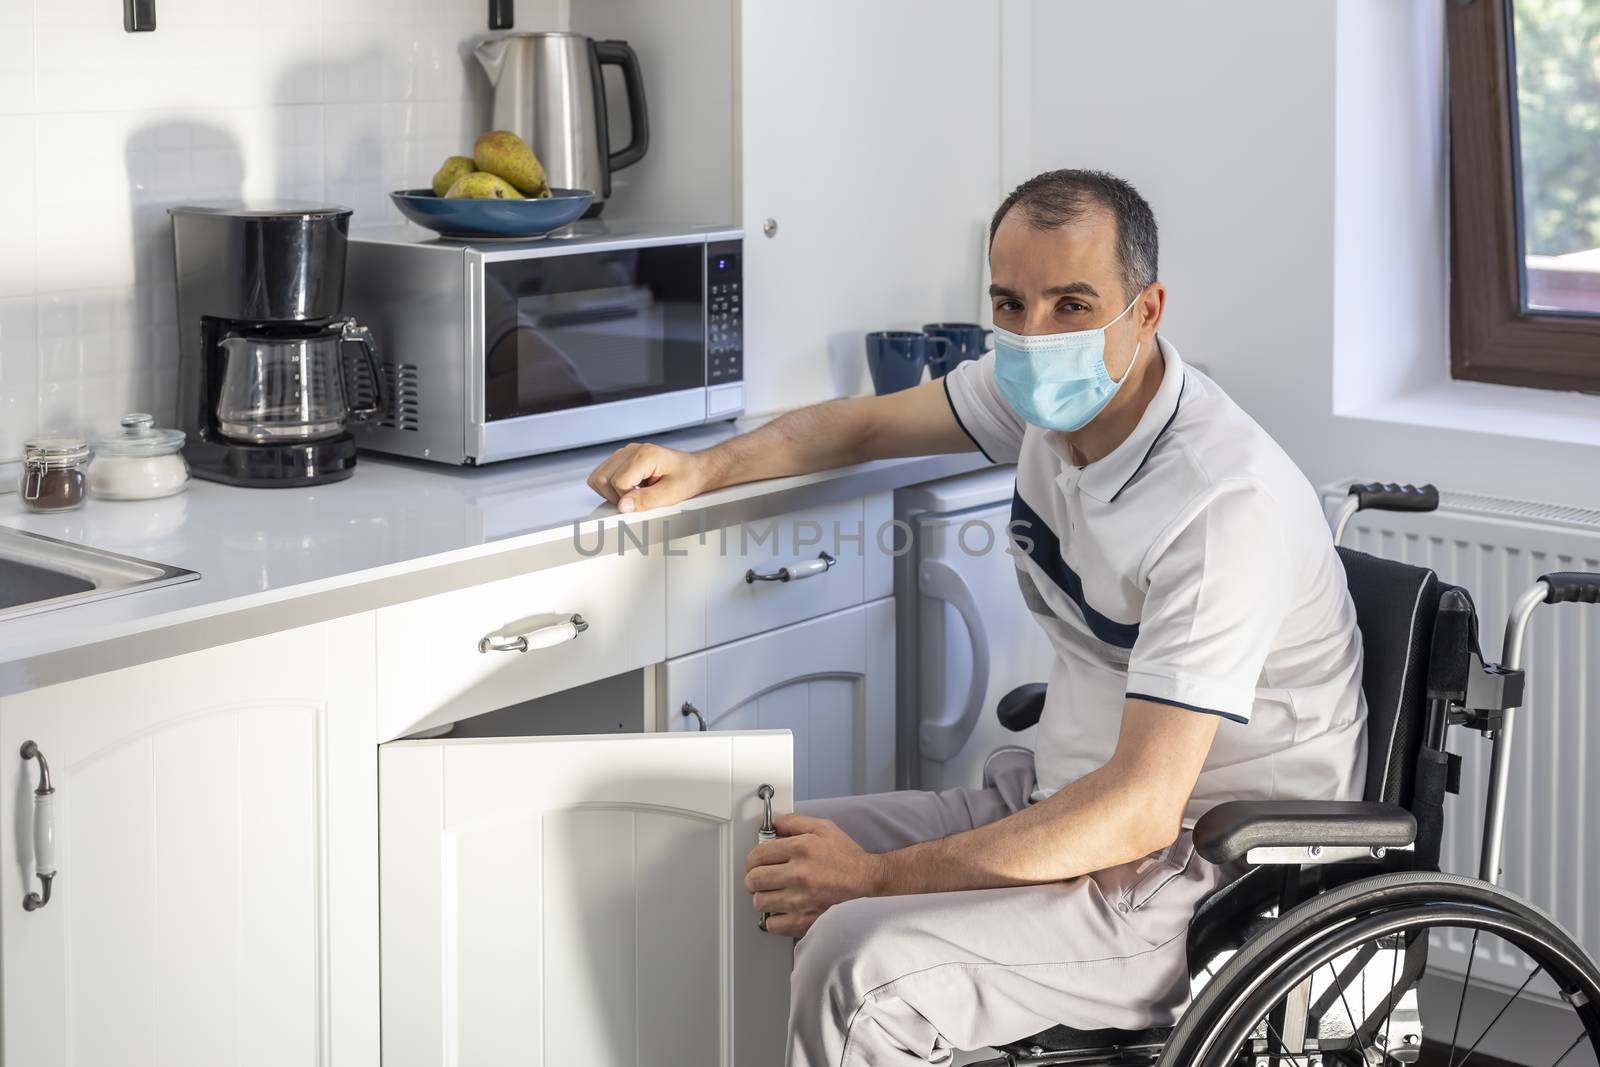 Smiling Young Handicapped Man Sitting On Wheelchair In Kitchen.  Young man wearing face mask sitting in front of kitchen. Focus on his face.